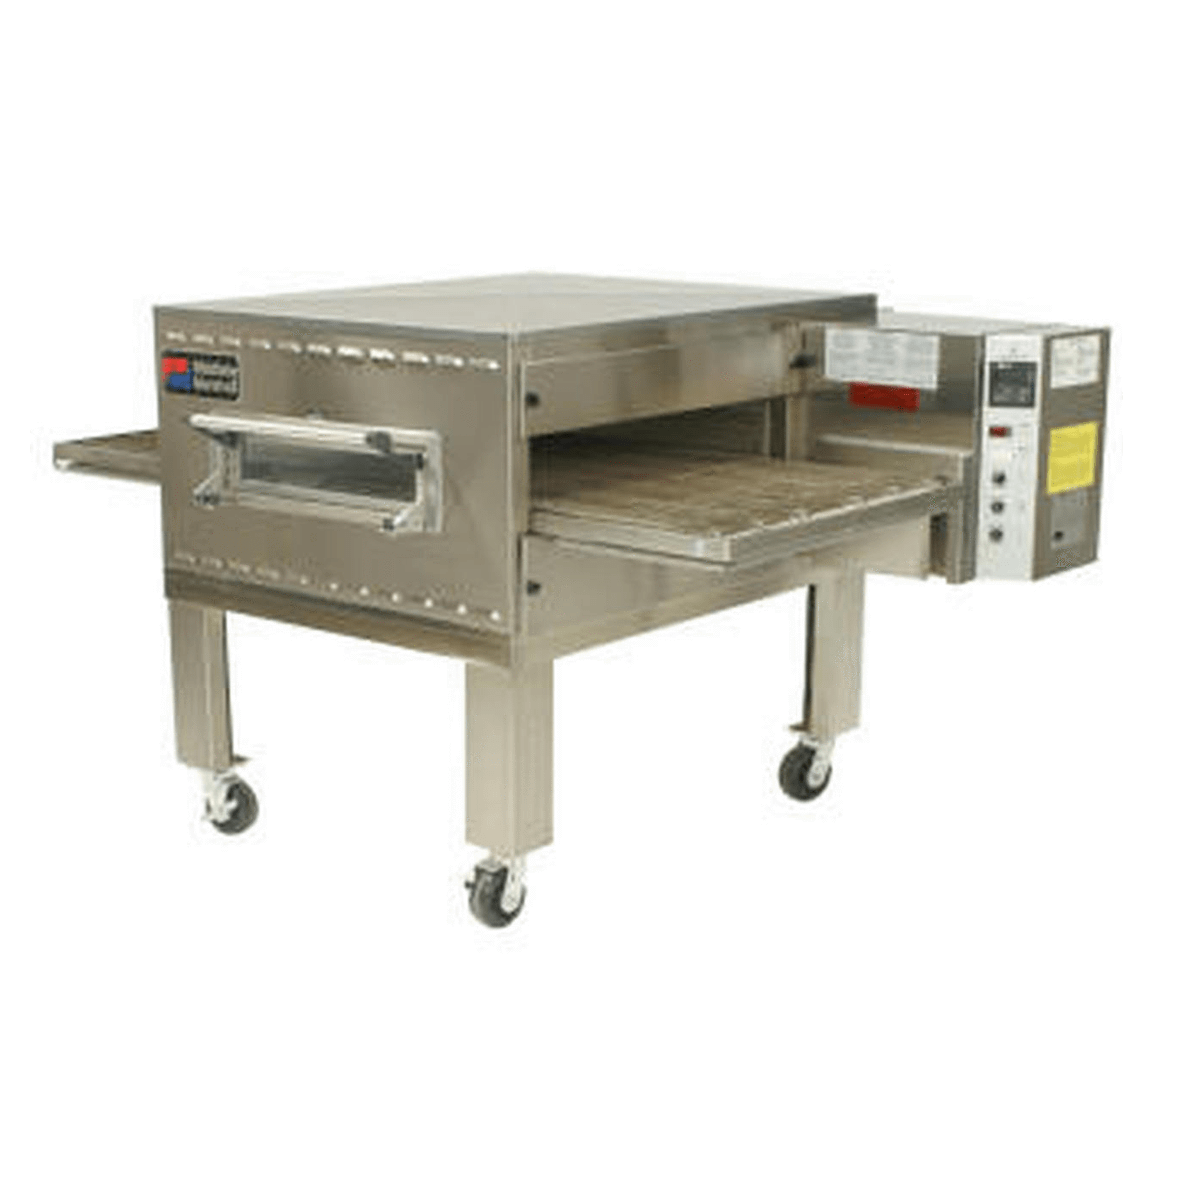 Middleby Marshall PS540 Electric Conveyor Oven